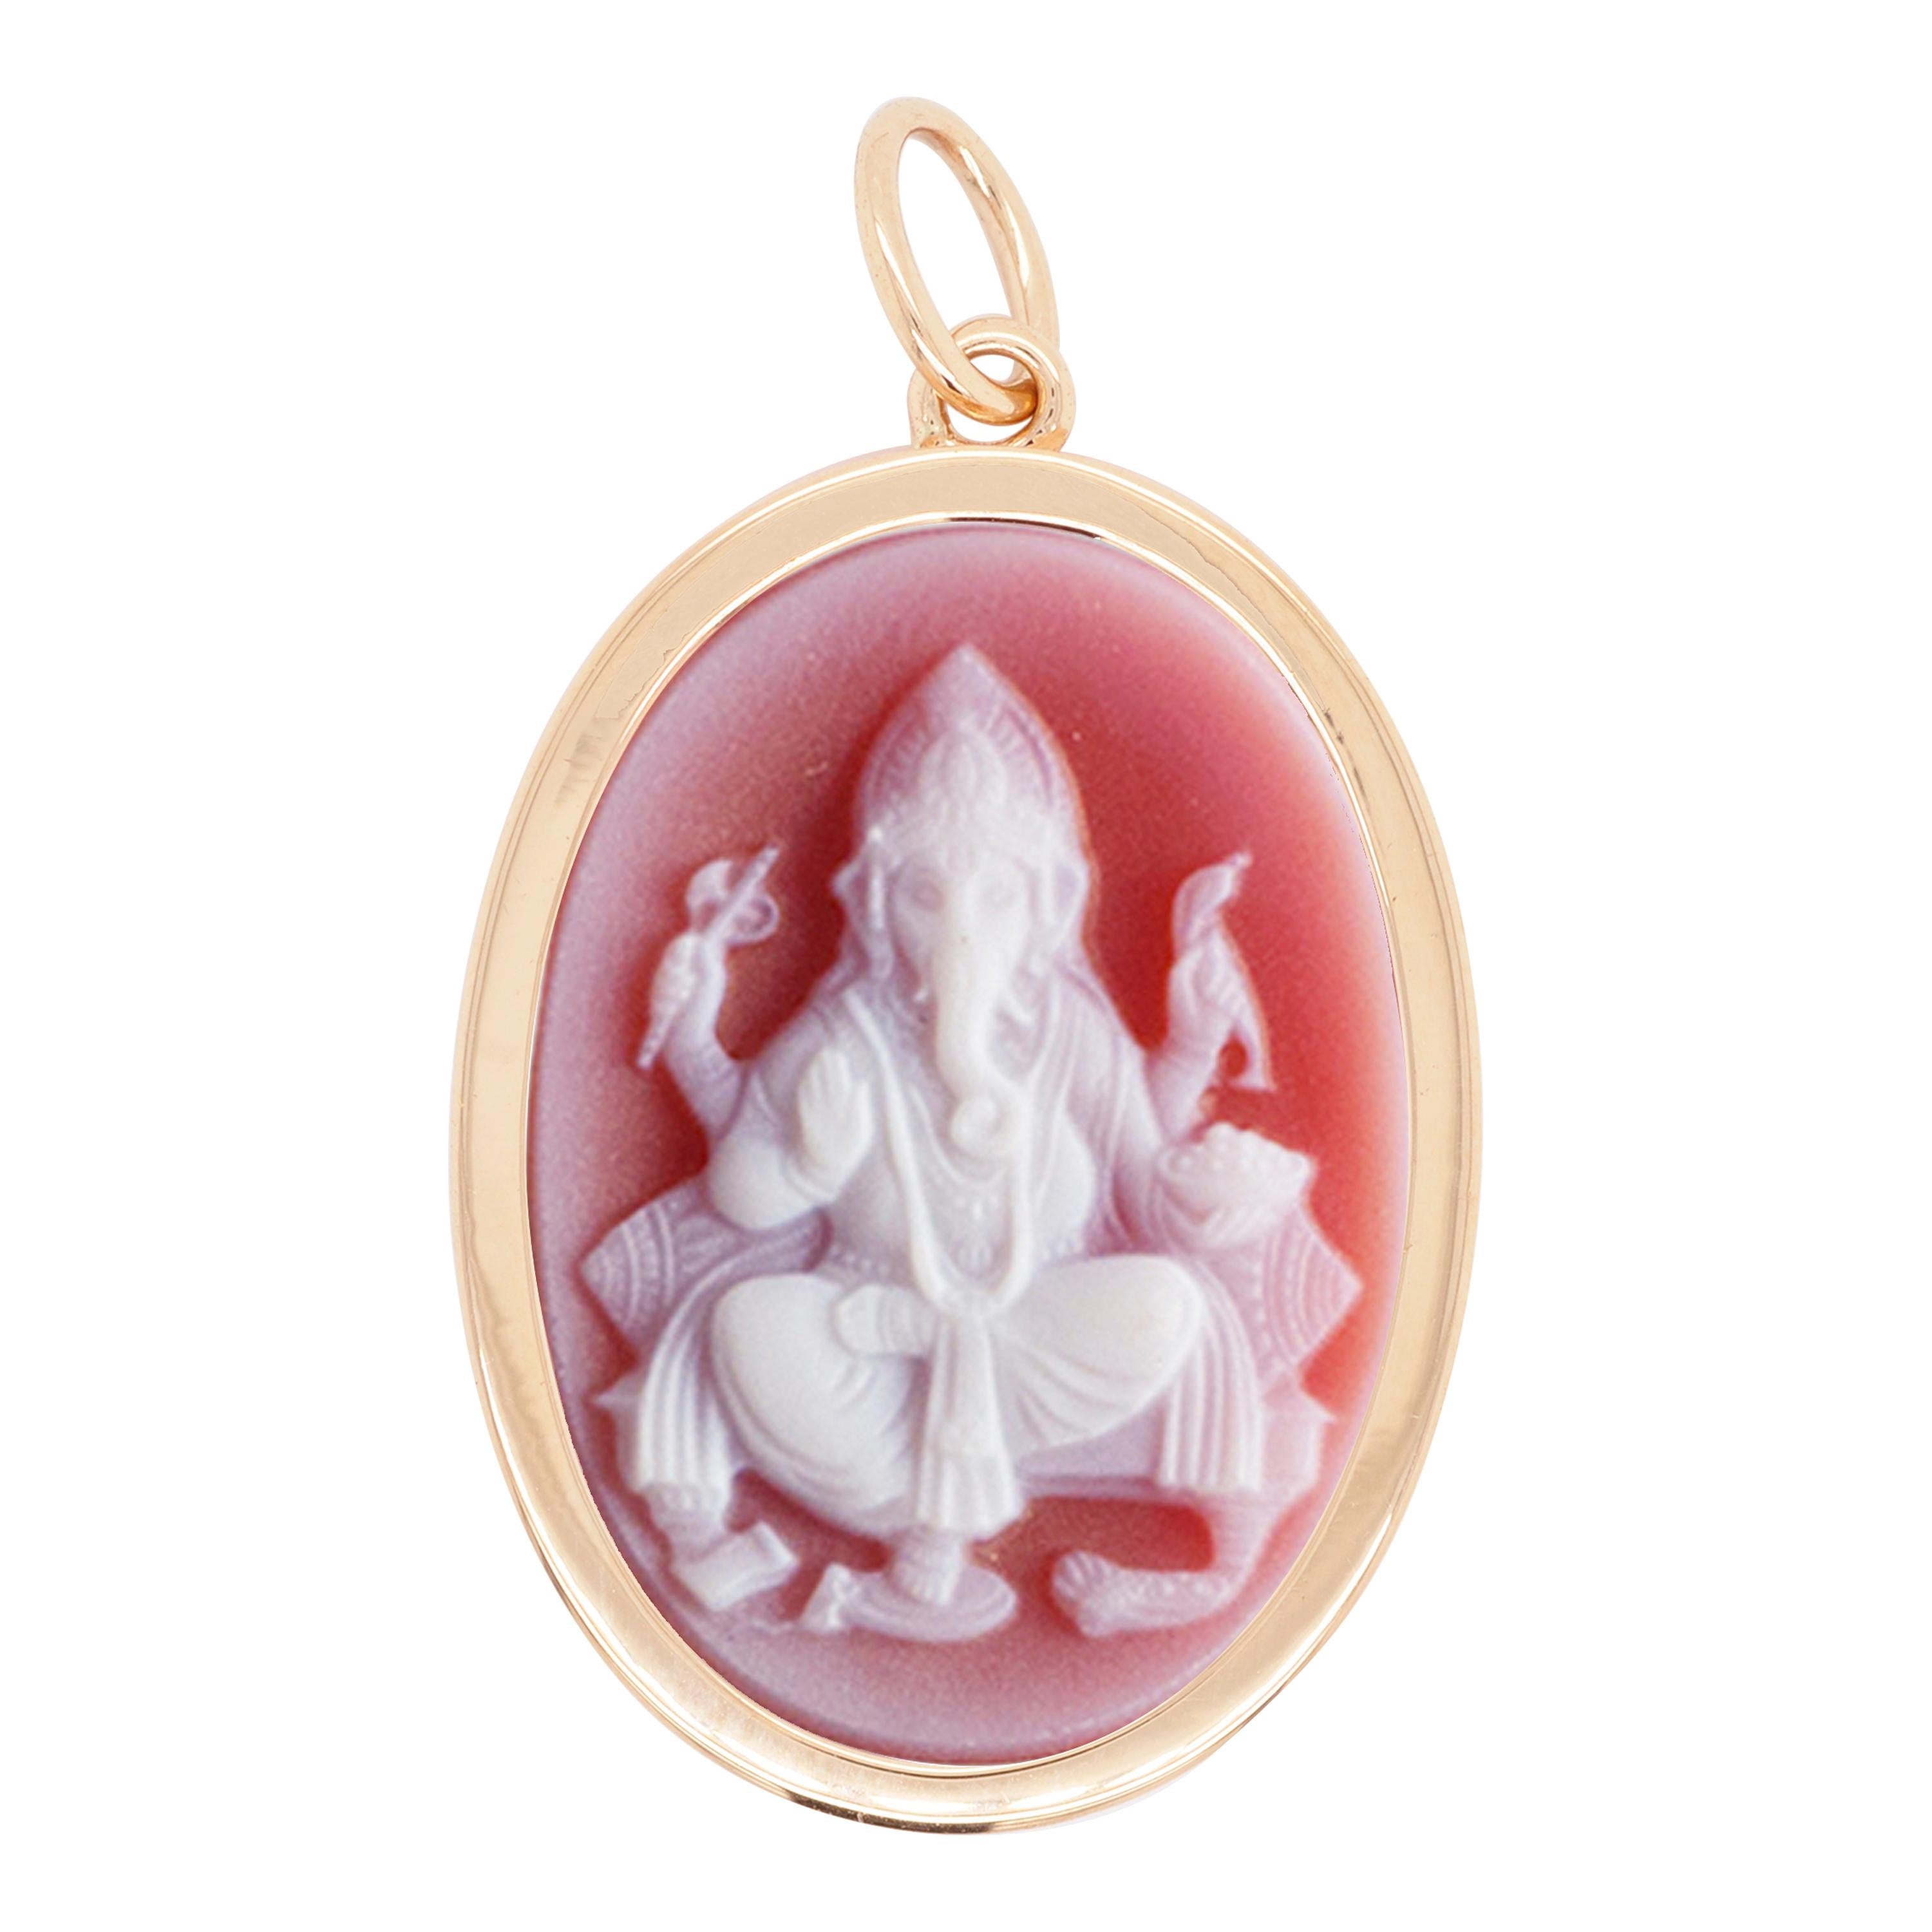 Reversible 18 karat yellow gold ganesha agate cameo om pendant necklace.

Introducing the versatile and captivating reversible necklace in 18 karat yellow gold with a Ganesha agate cameo and Om pendant. This necklace offers the unique feature of two